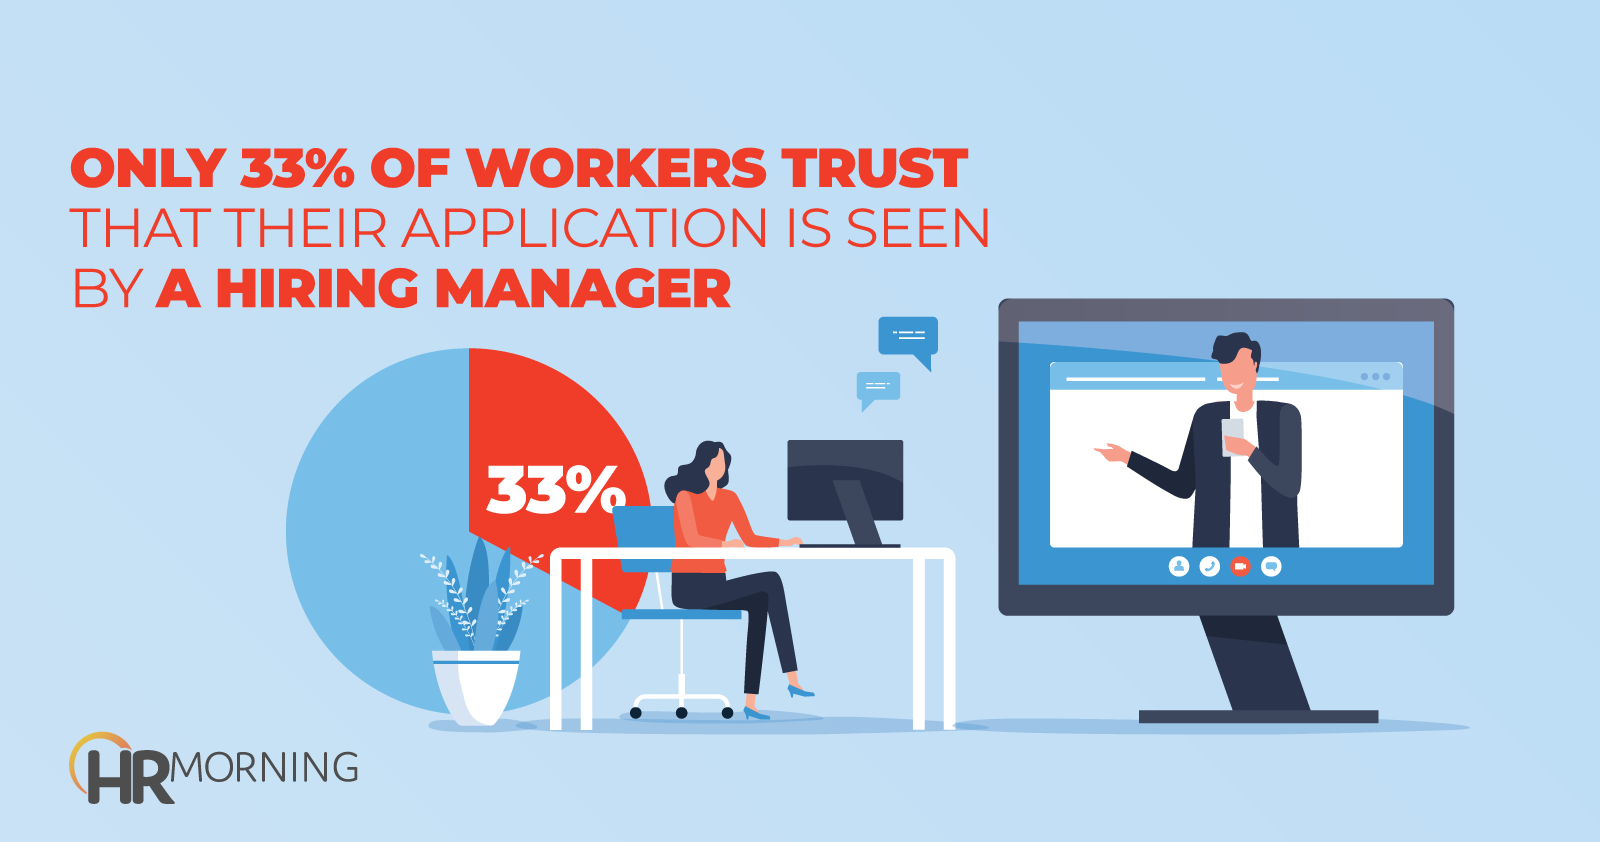 Only 33% of workers trust that their application is seen by a hiring manager